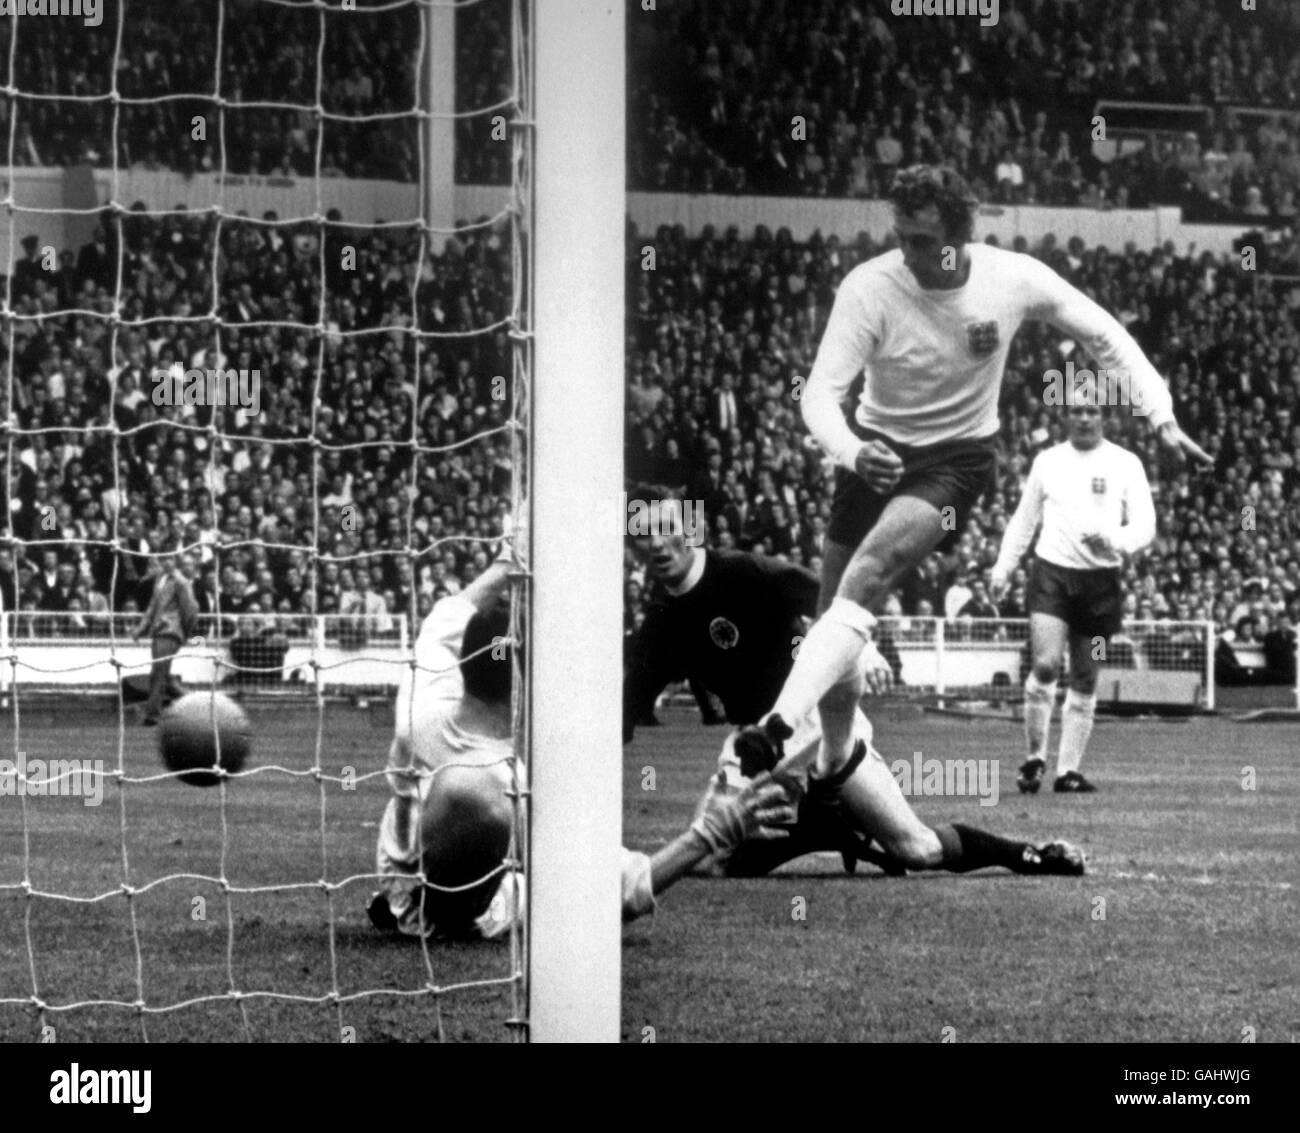 Scotland's Jim Brogan (c) looks on as England's Martin Chivers (r) flips the ball past Scotland goalkeeper Ronnie Simpson (l), only for the goal to be disallowed Stock Photo